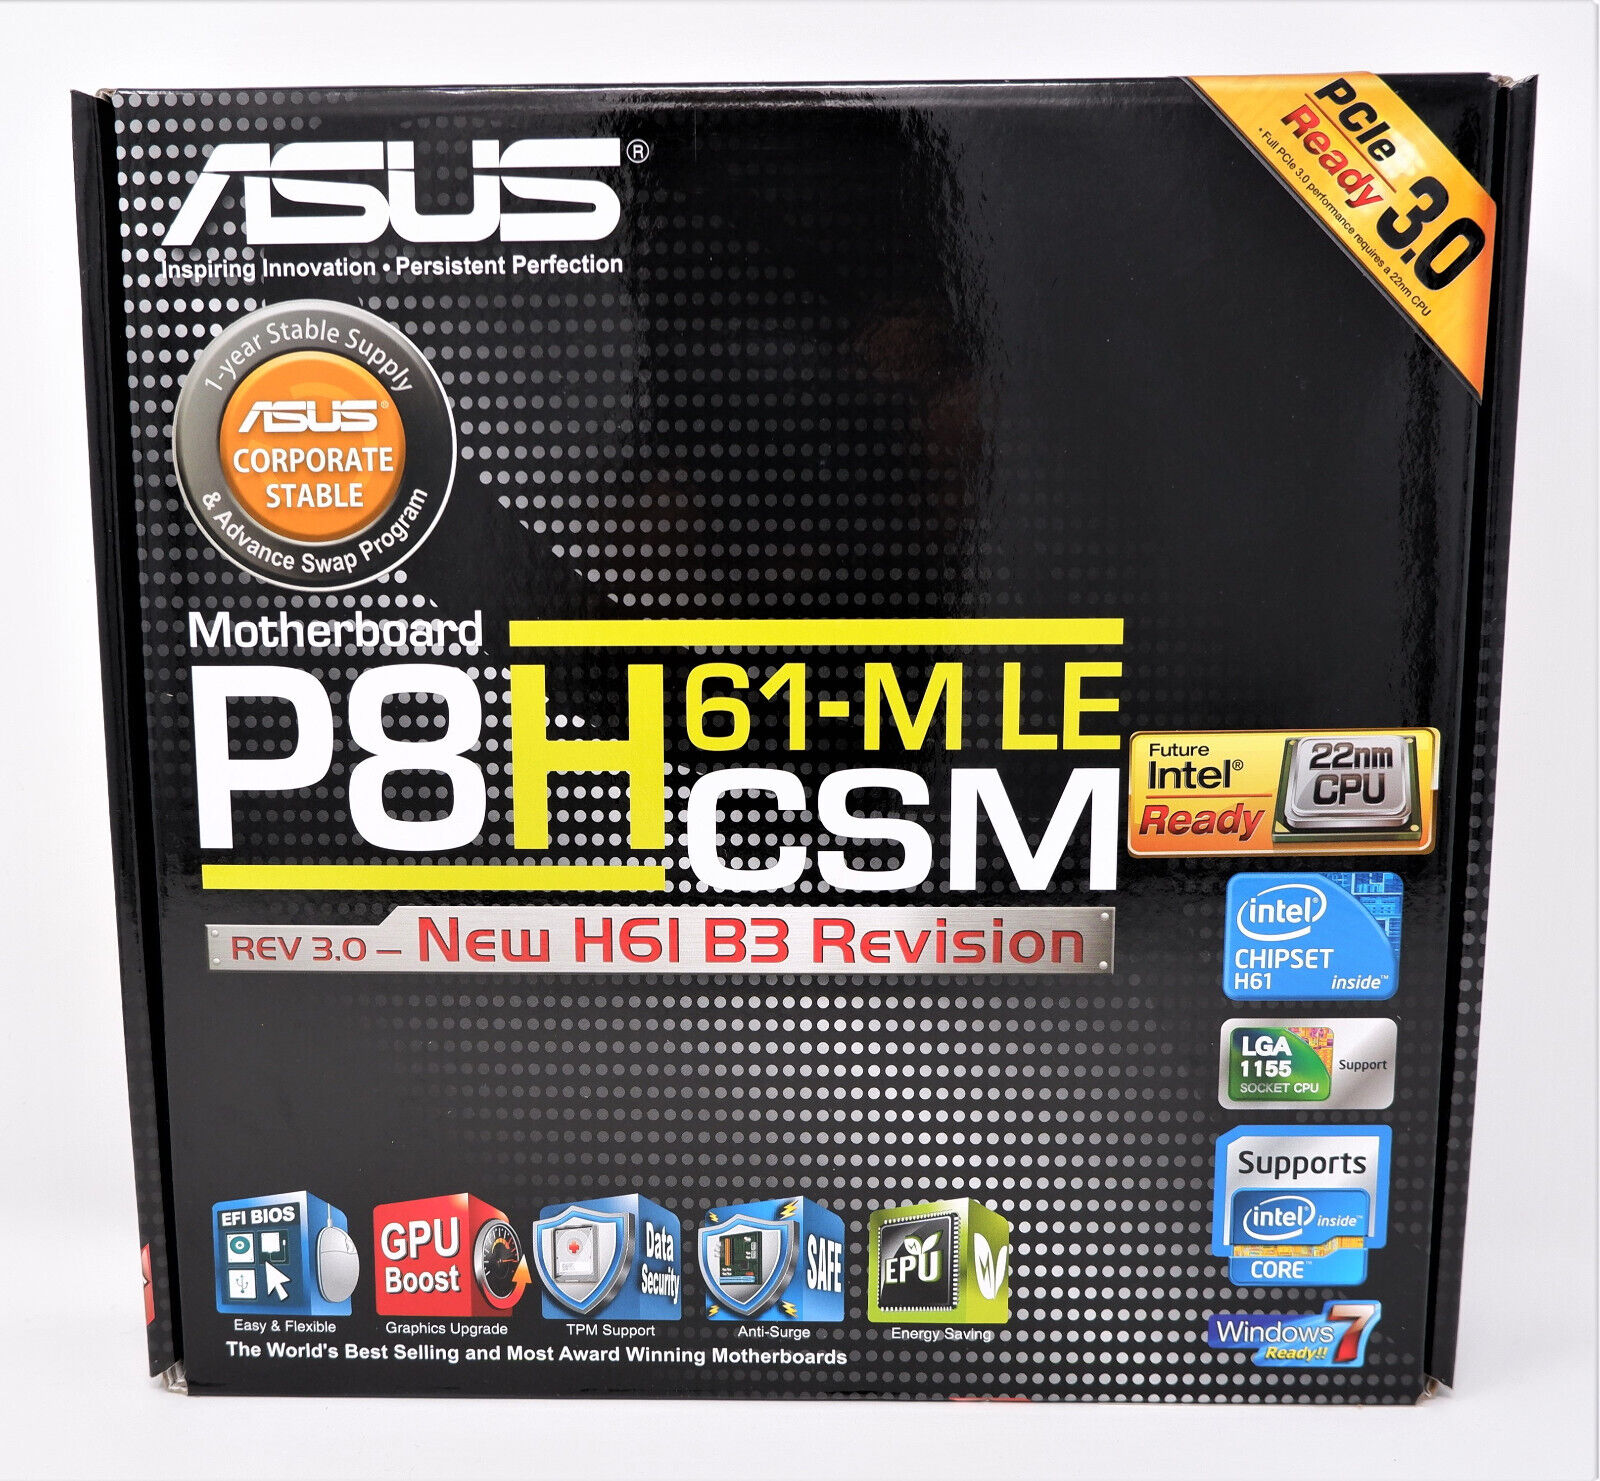 ASUS P8H61-M LE CSM R3.0 LGA1155 MATX VID LAN SOUND 6-USB PCI-E MOTHERBOARD, NEW